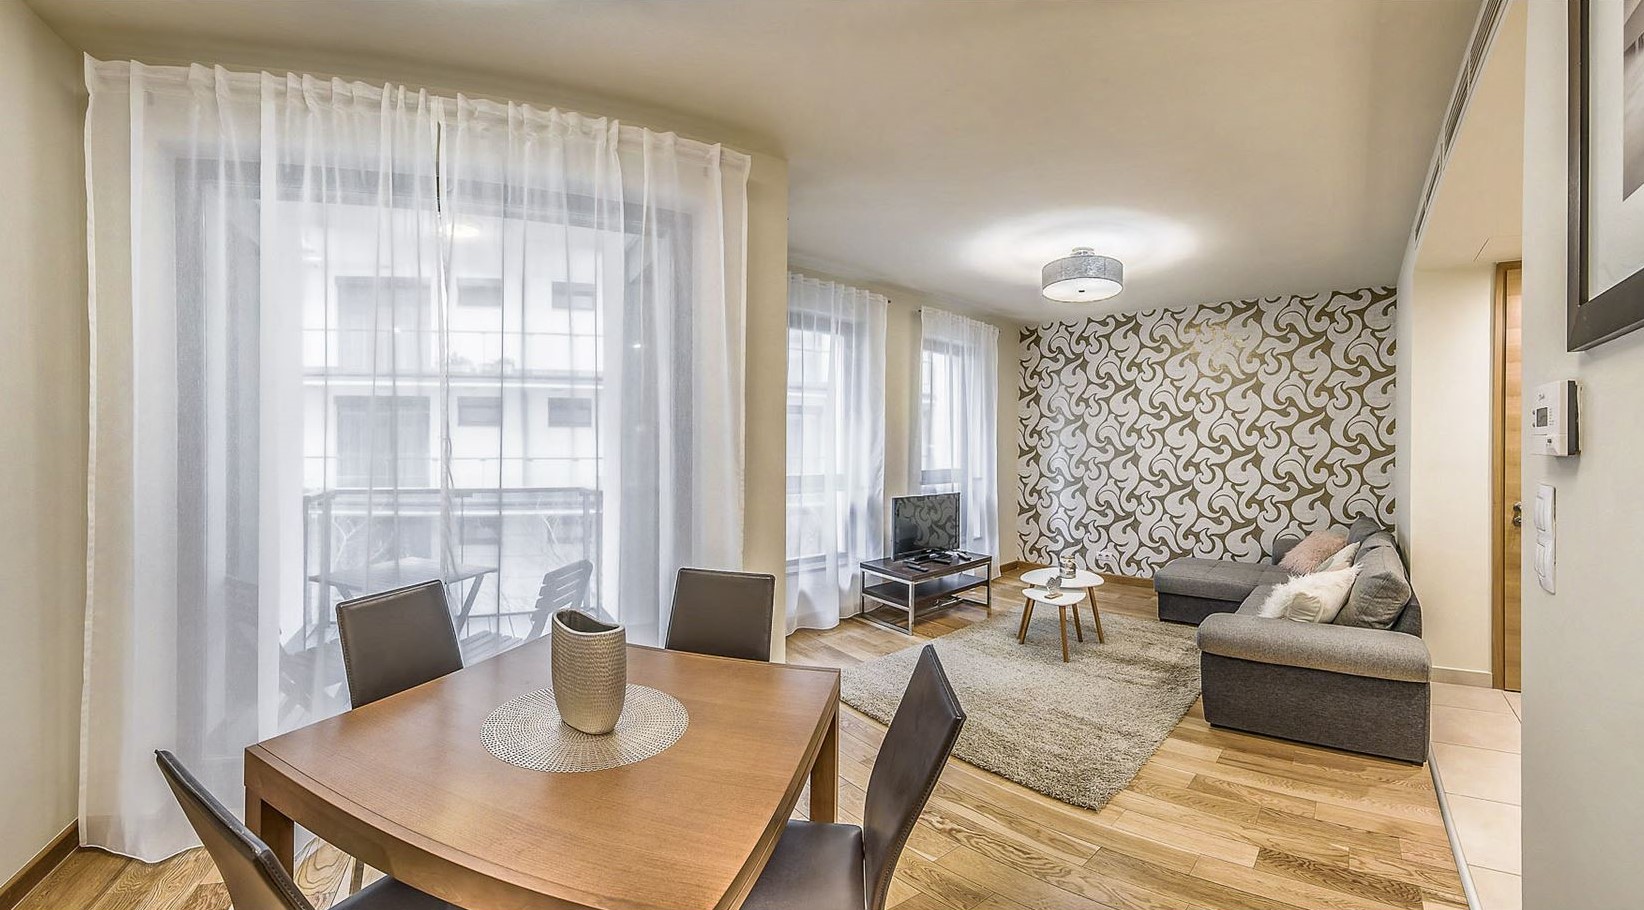 budapest-rental-avenue-gardens-flat-apartment-for-rent-with-garage-terrace-long-term-lease-downtown-district-6-1-bedroom-apartment-newly-built-flat-for-rent8